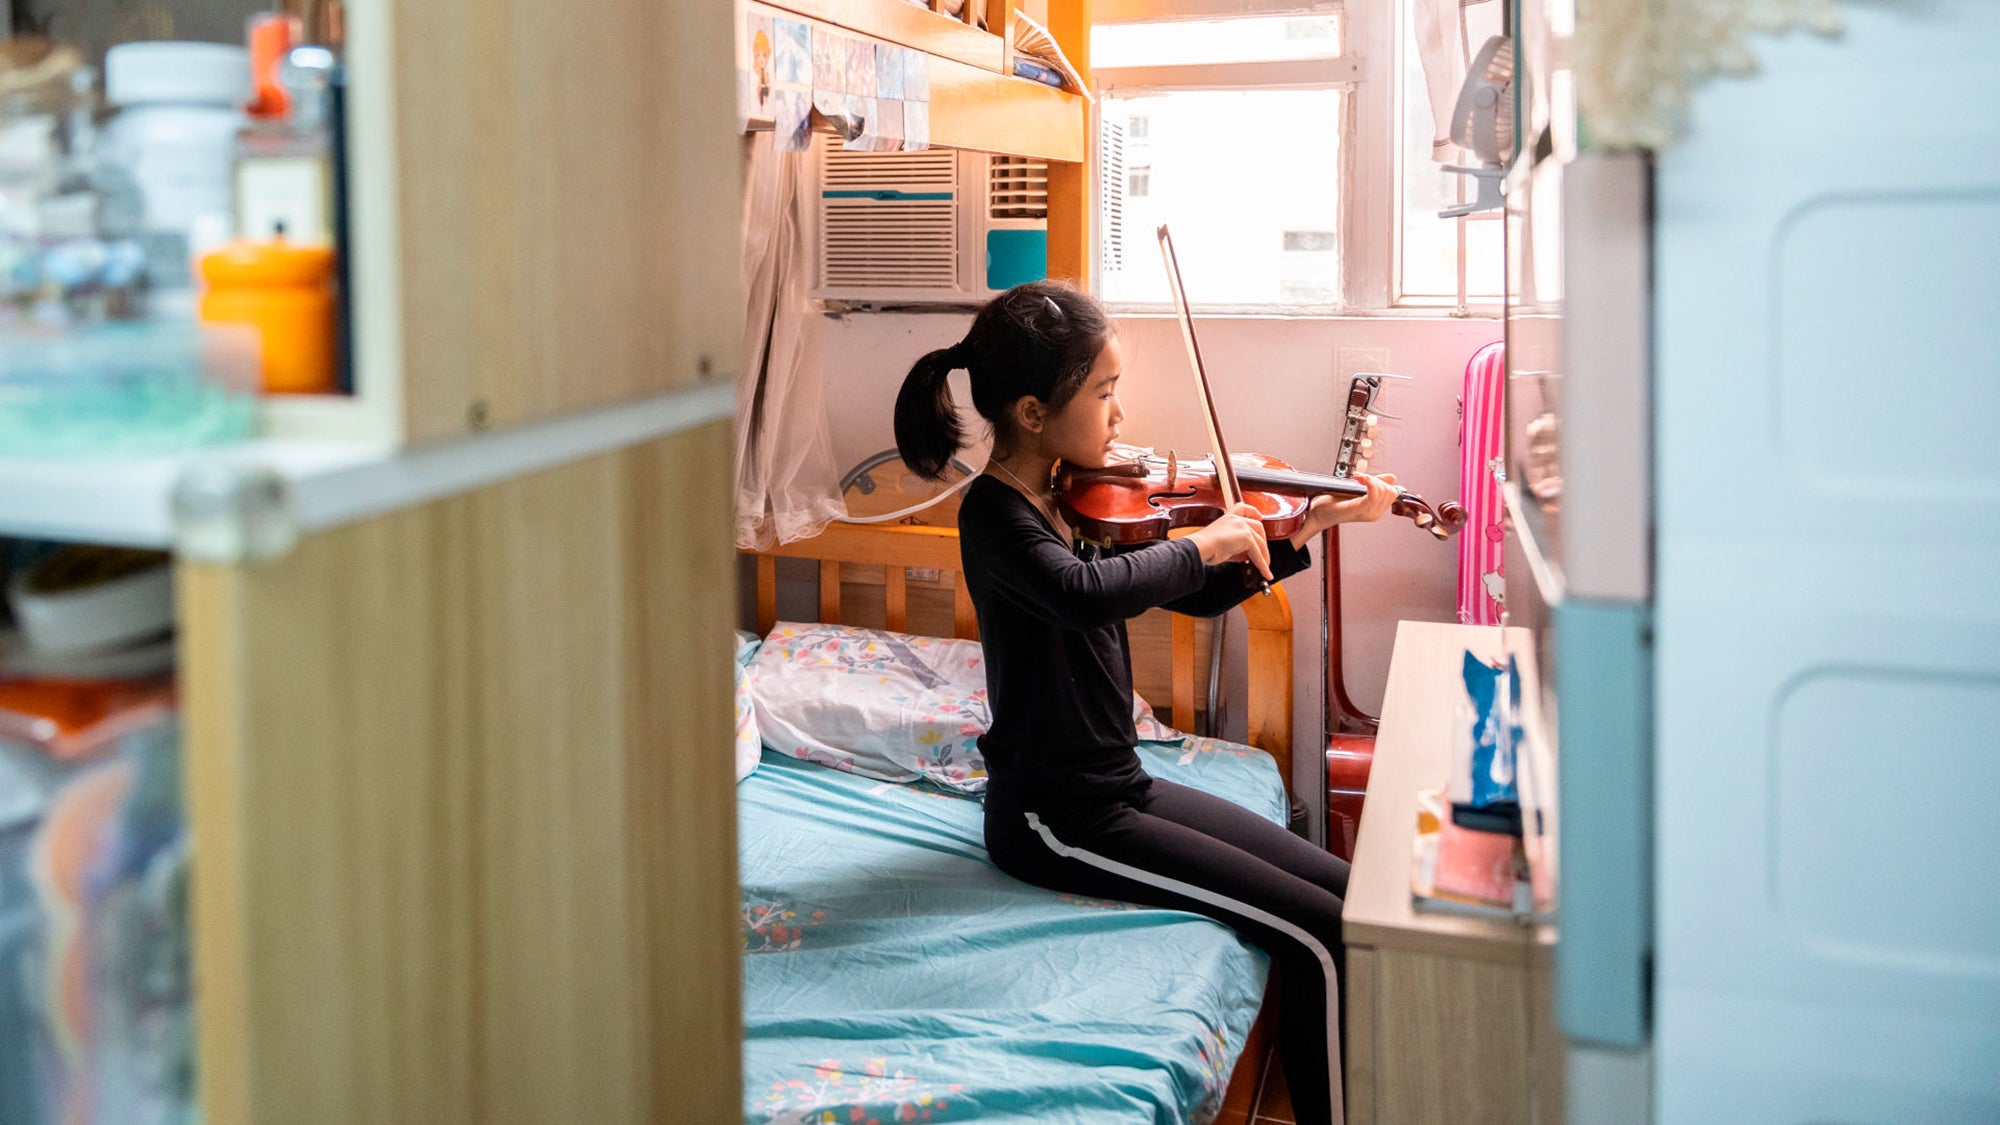 In Hong Kong’s shoebox flats, an opportunity for targeted care